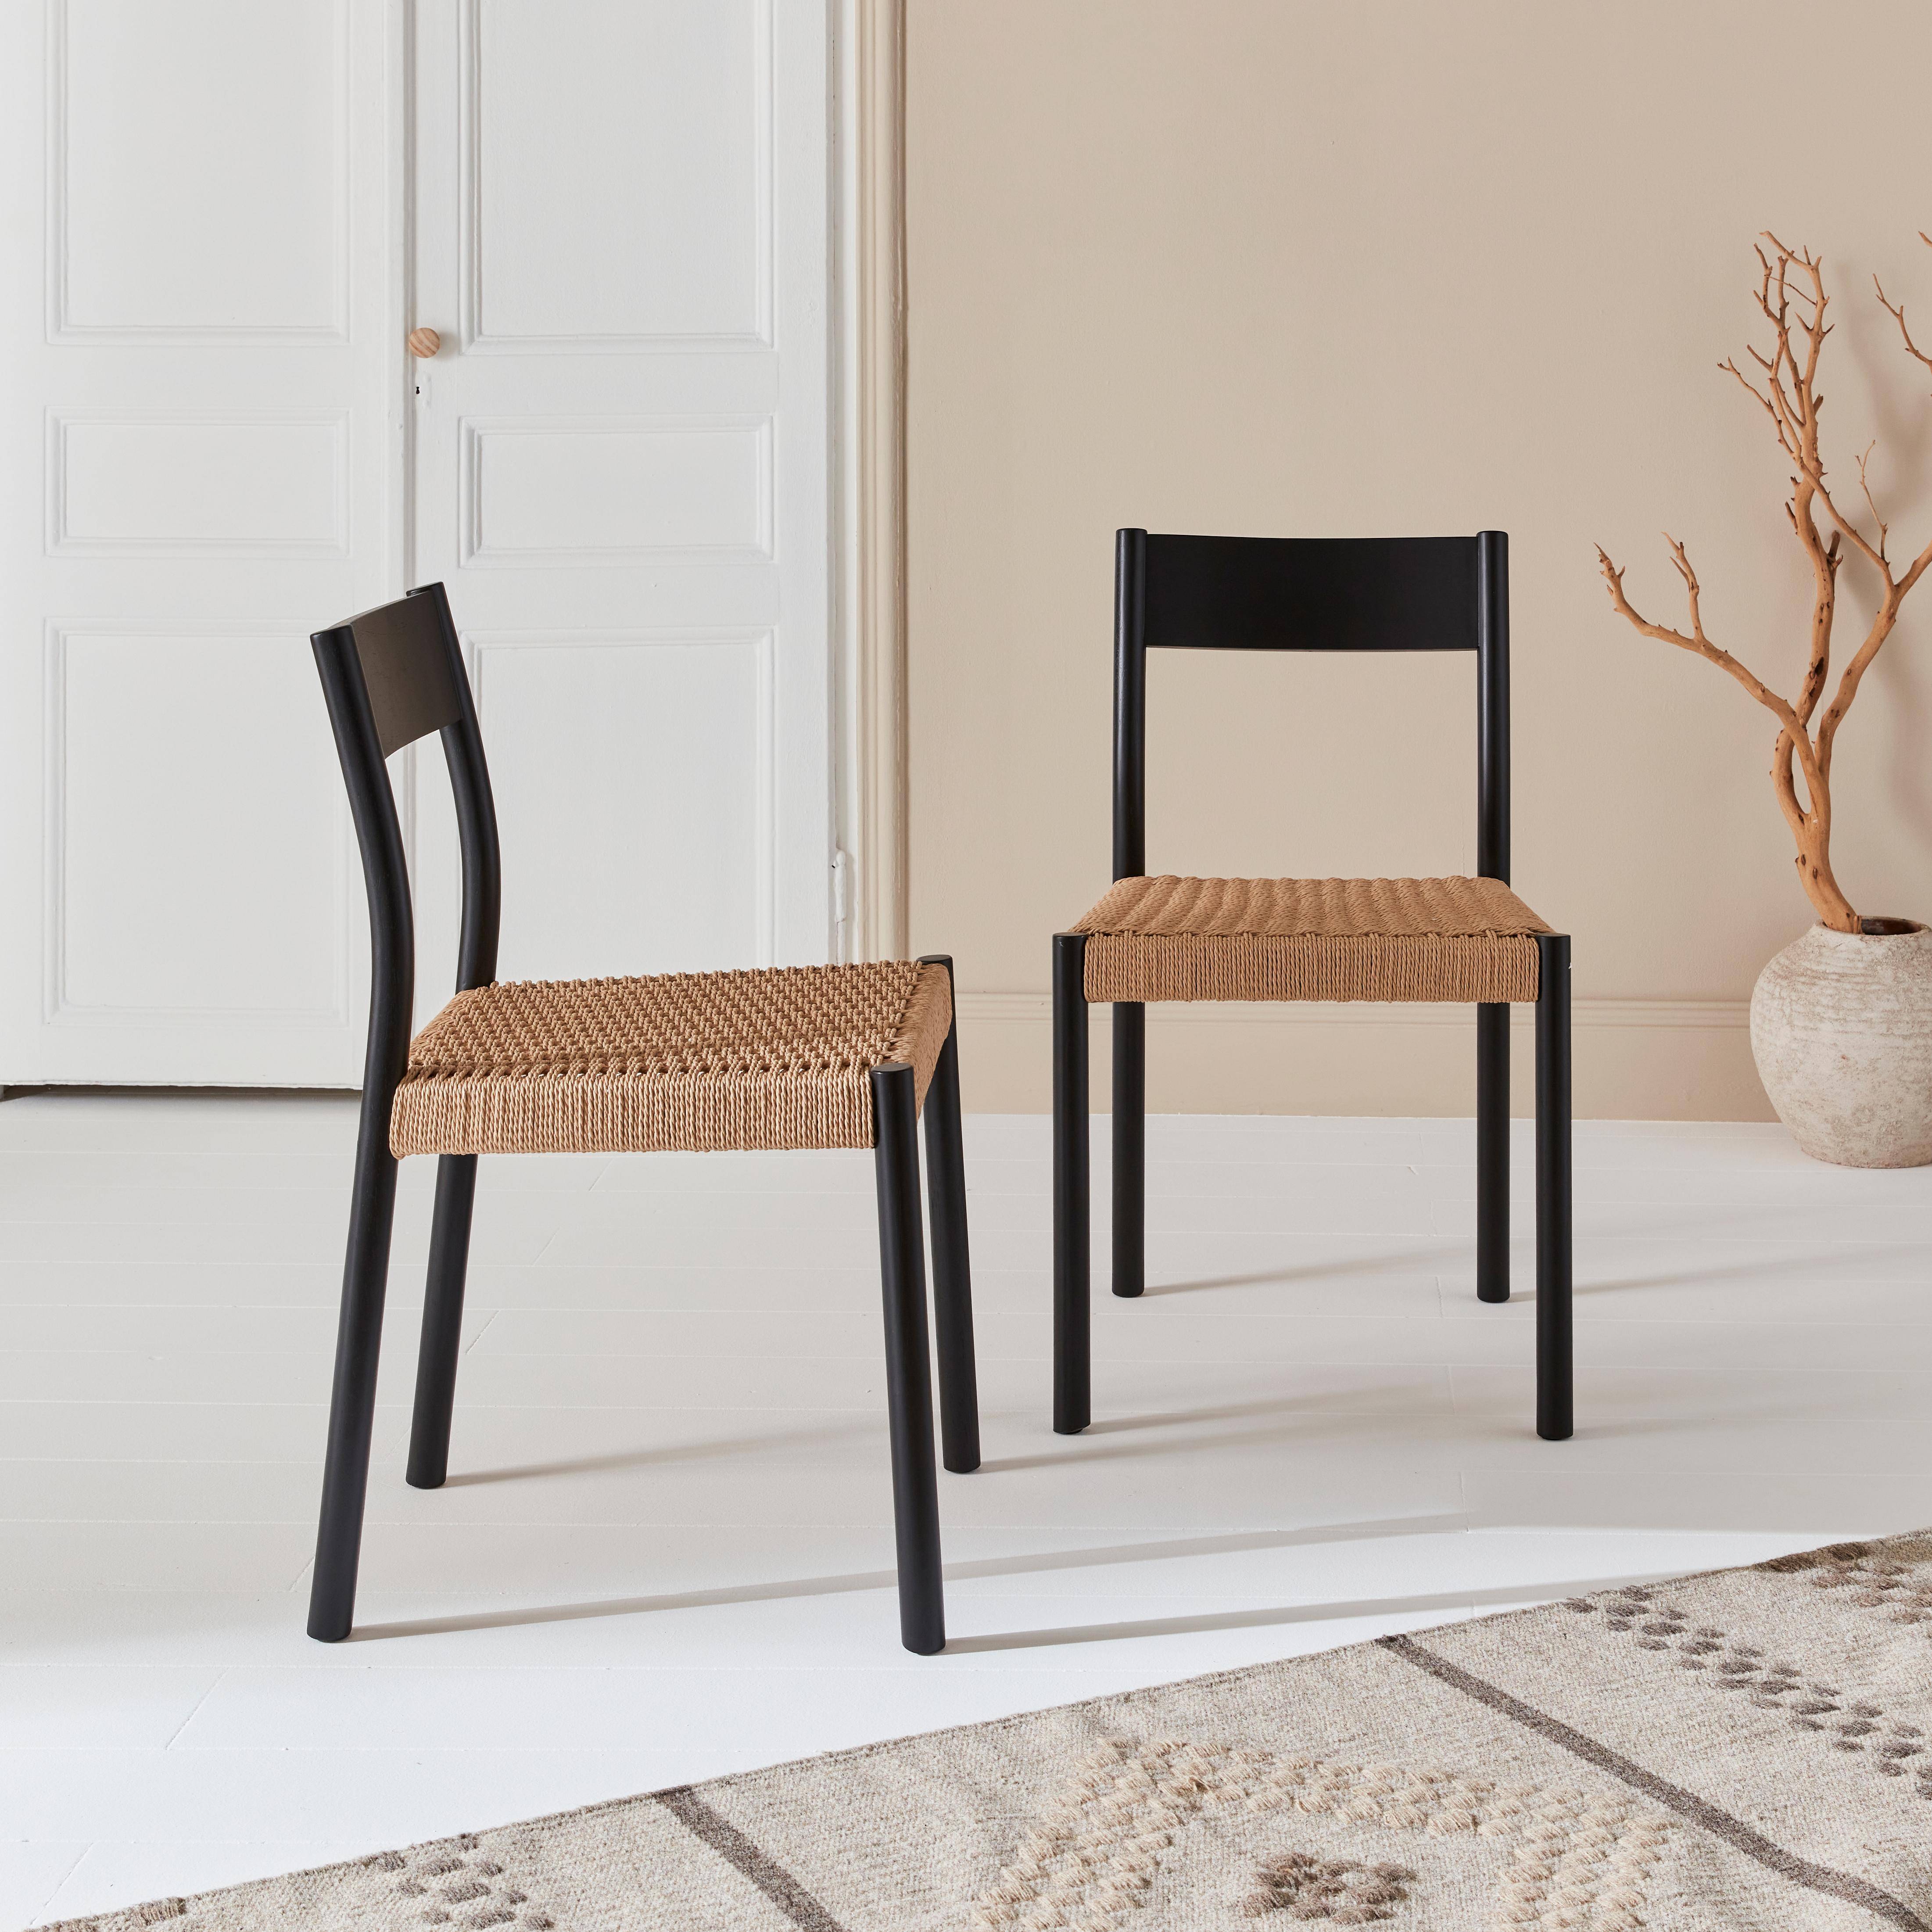 Pair of timeless design Wood and Rope Dining Room chairs, L49.5 x W53 x H82 cm, black,sweeek,Photo2